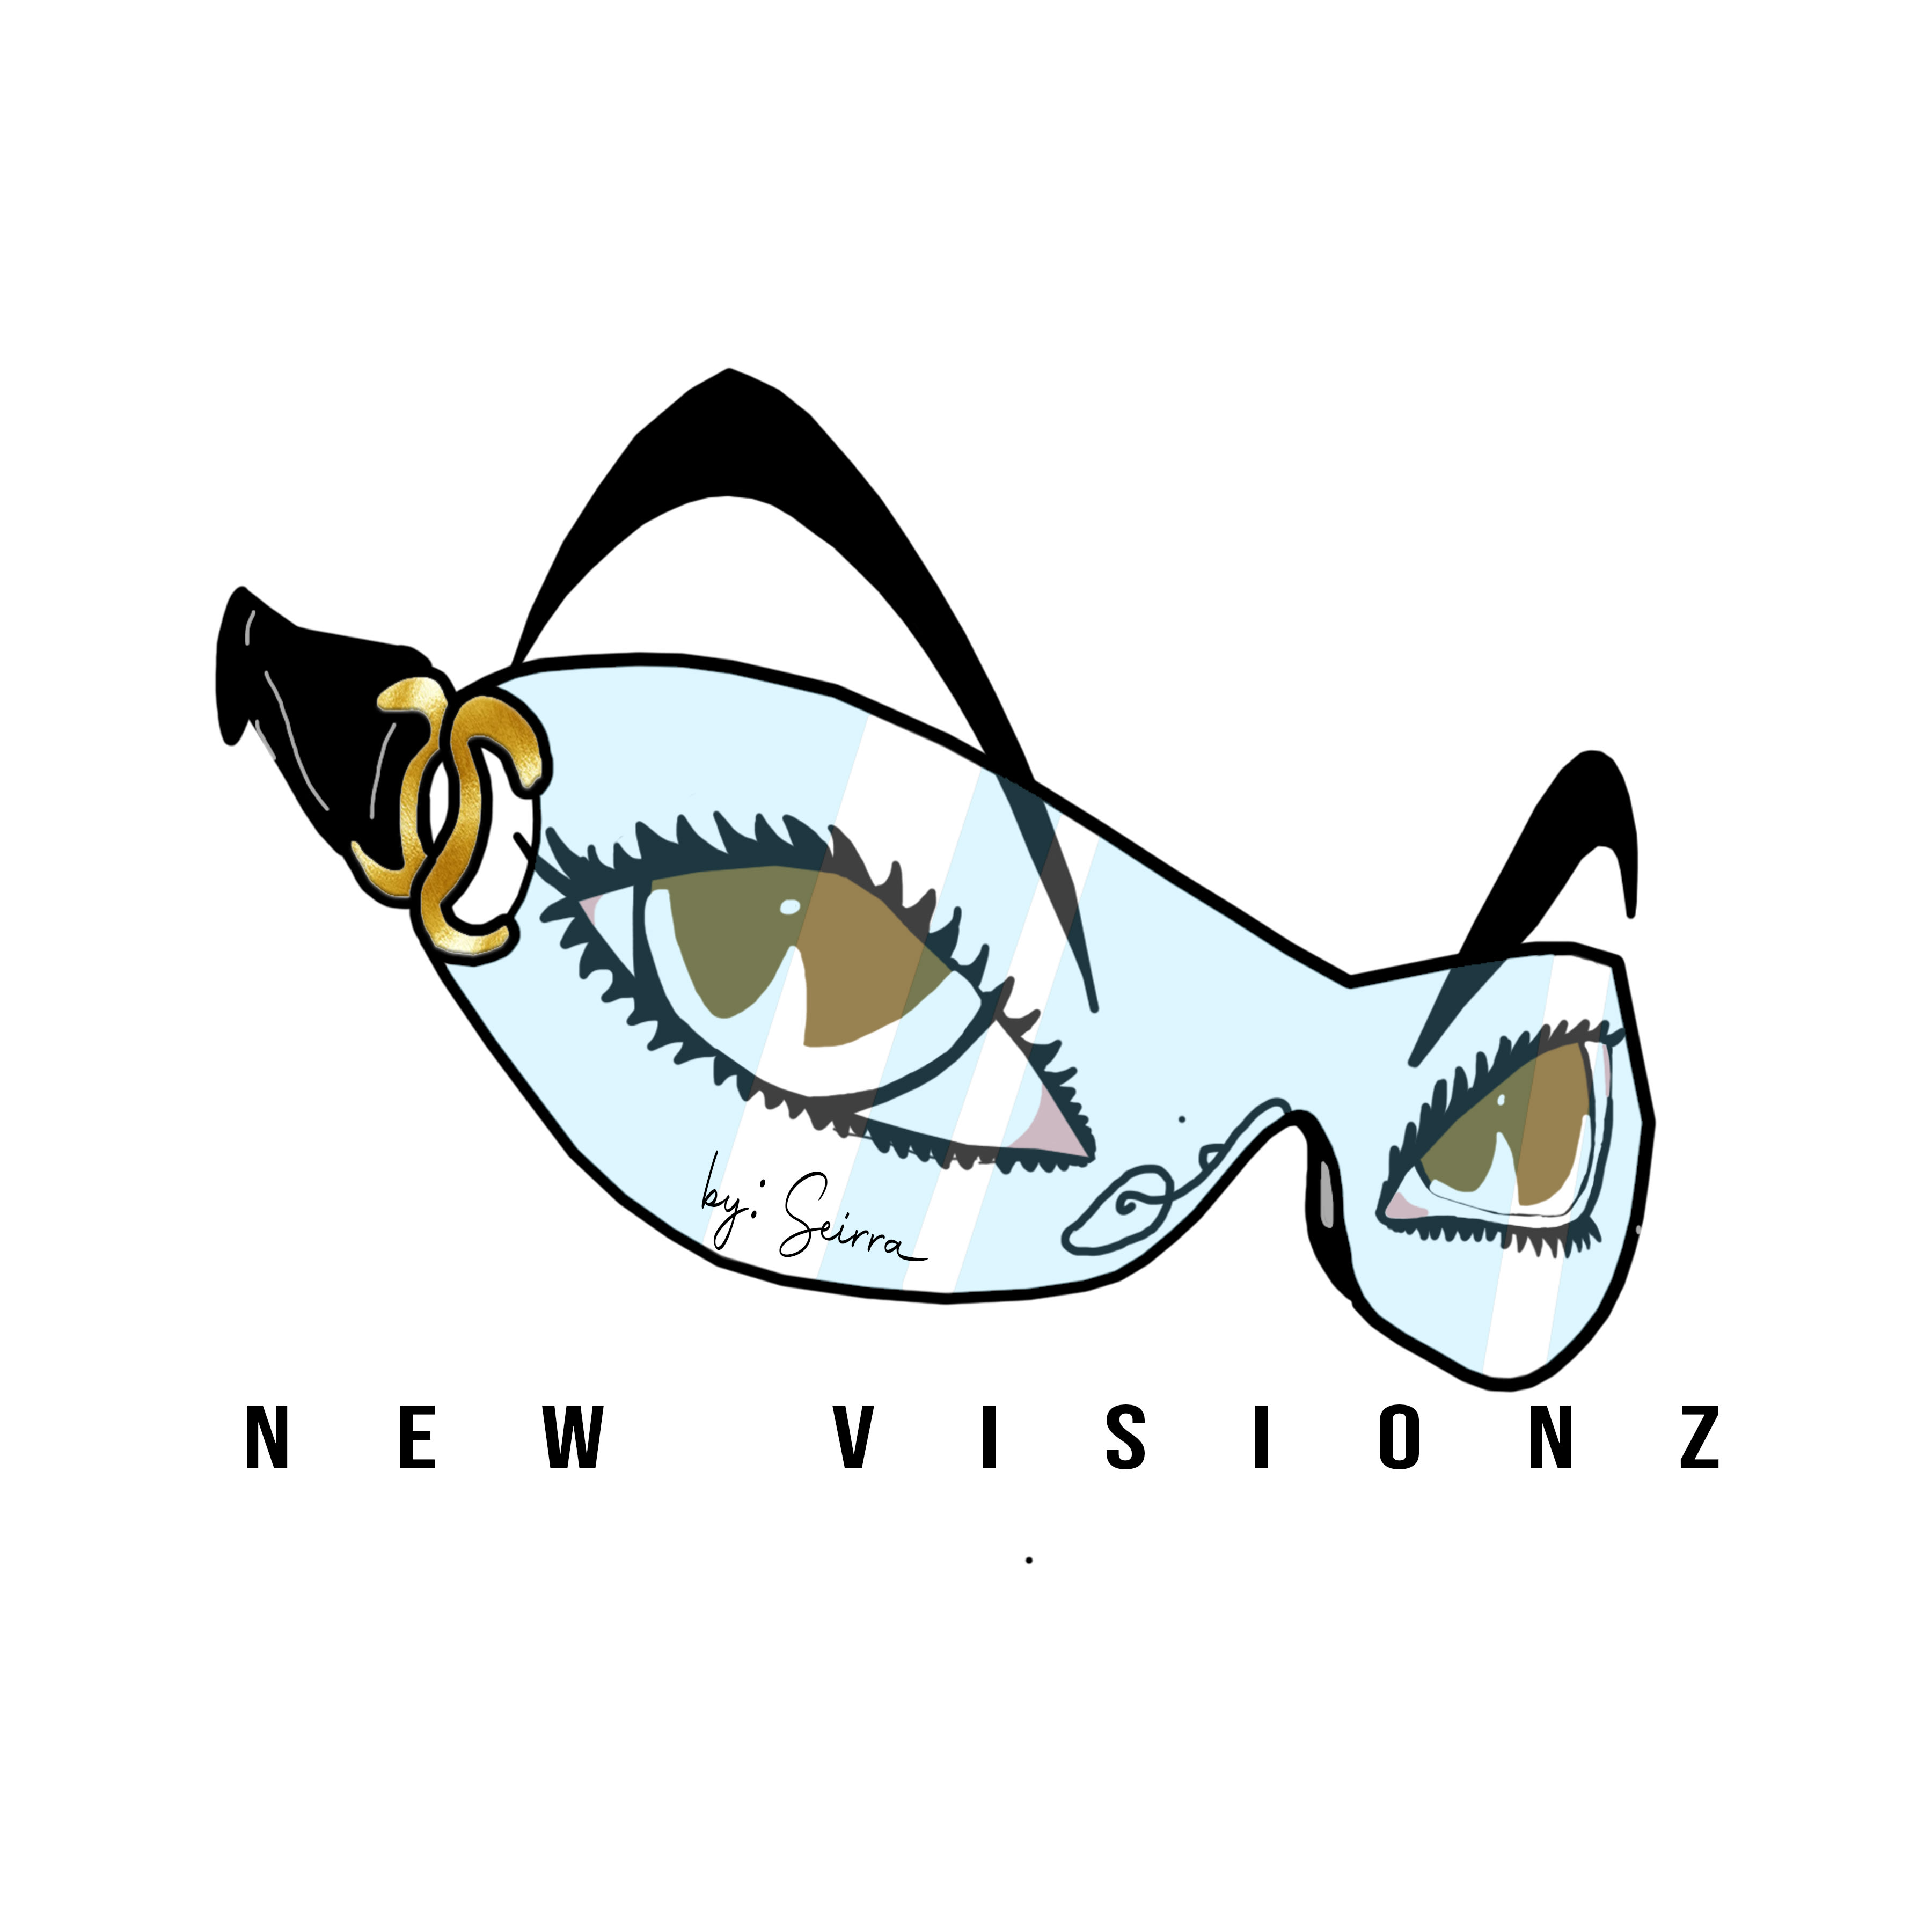 NEW VISIONZ